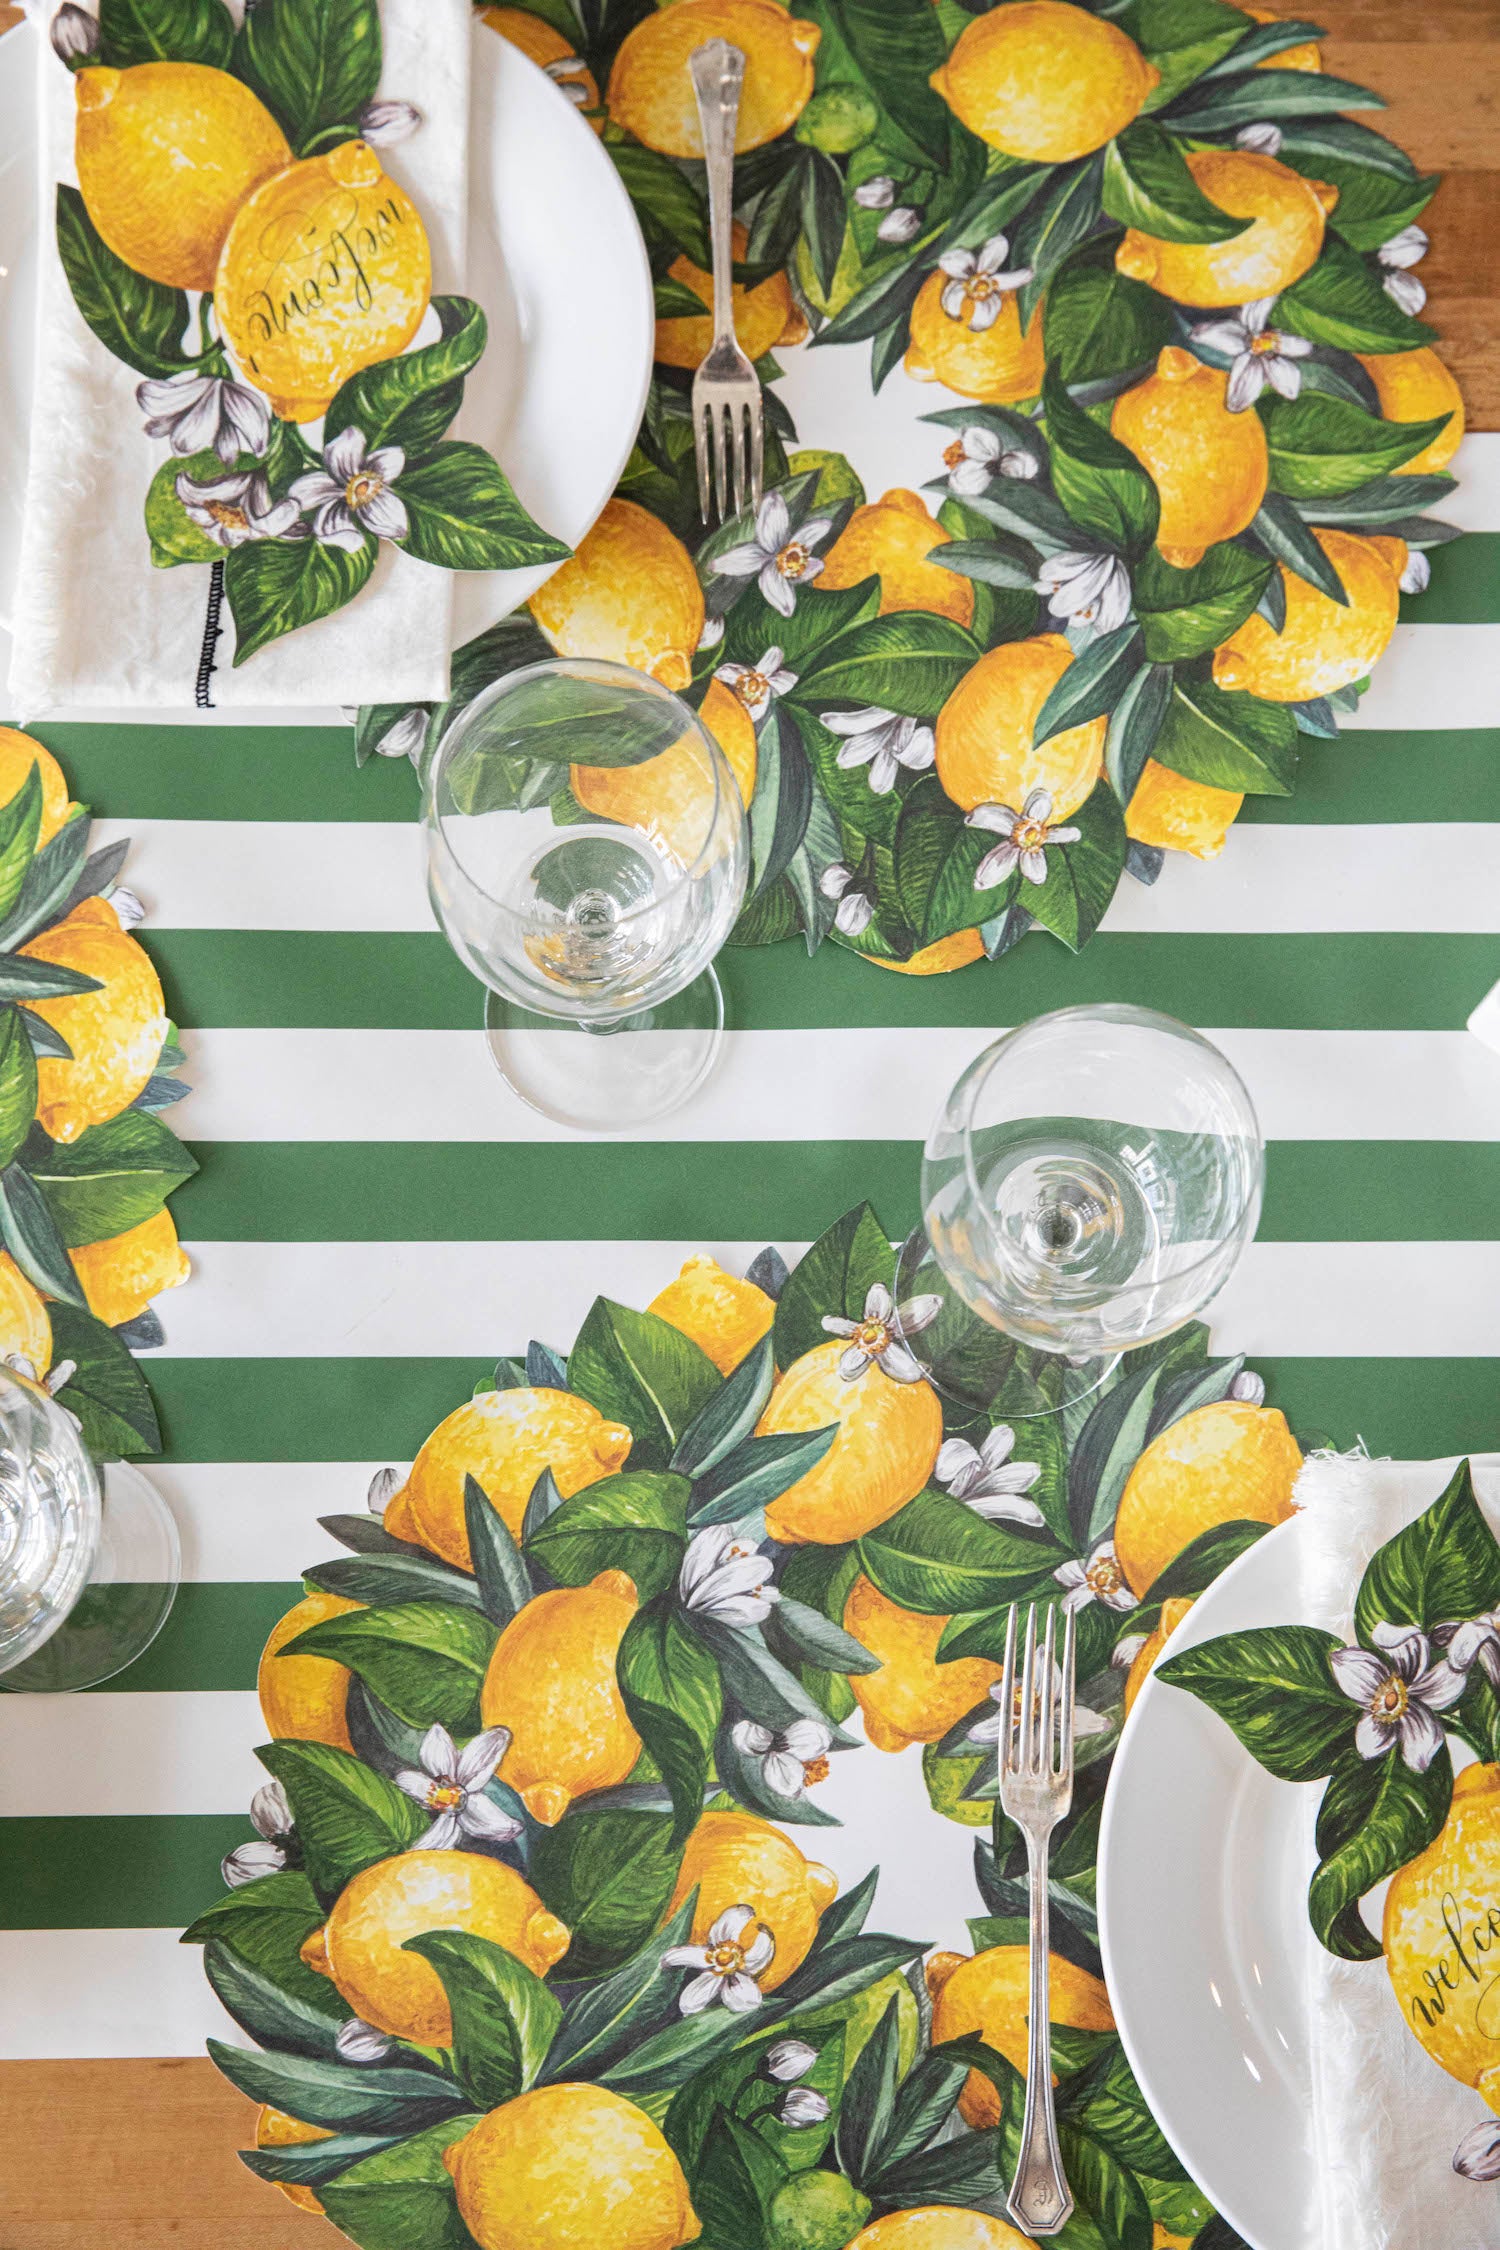 A table setting with Die-cut Lemon Wreath Placemat by Hester &amp; Cook, lemons, and green leaves.